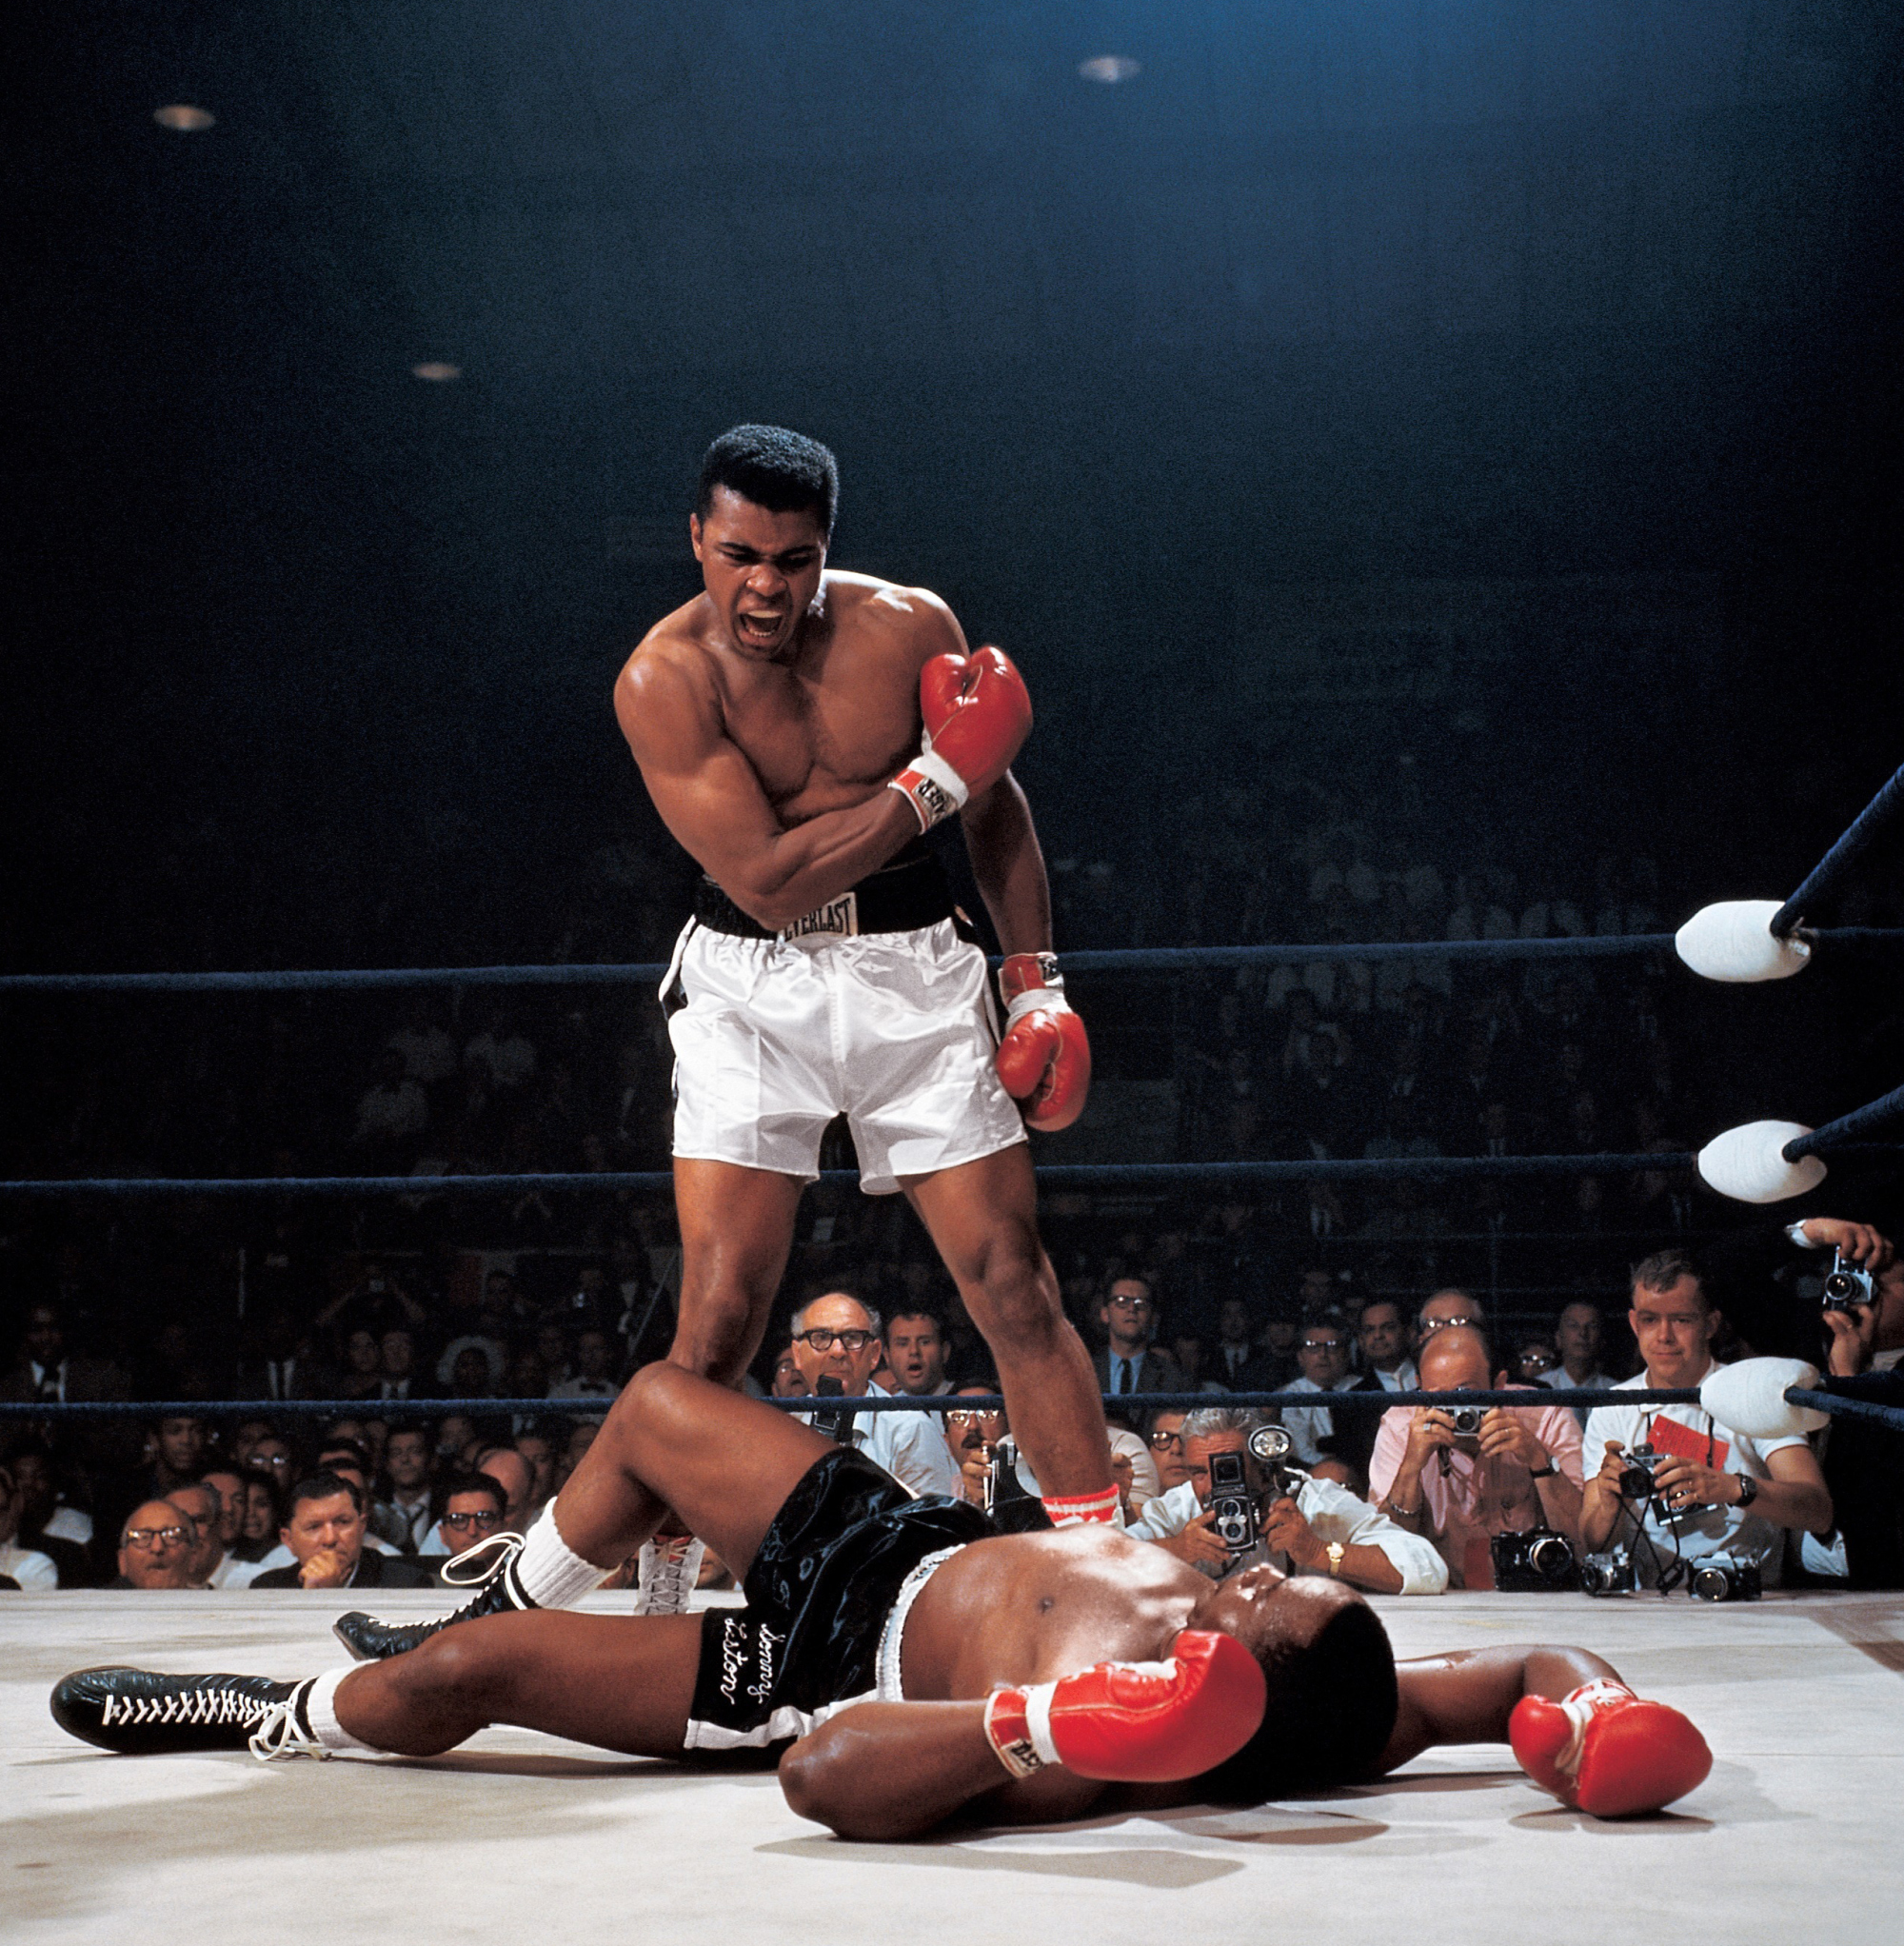 Muhammad Ali after first round knockout of Sonny Liston during World Heavyweight Title fight at St. Dominic's Arena in Lewiston, Maine on 5/25/1965. (Neil Leifer—Sports Illustrated)